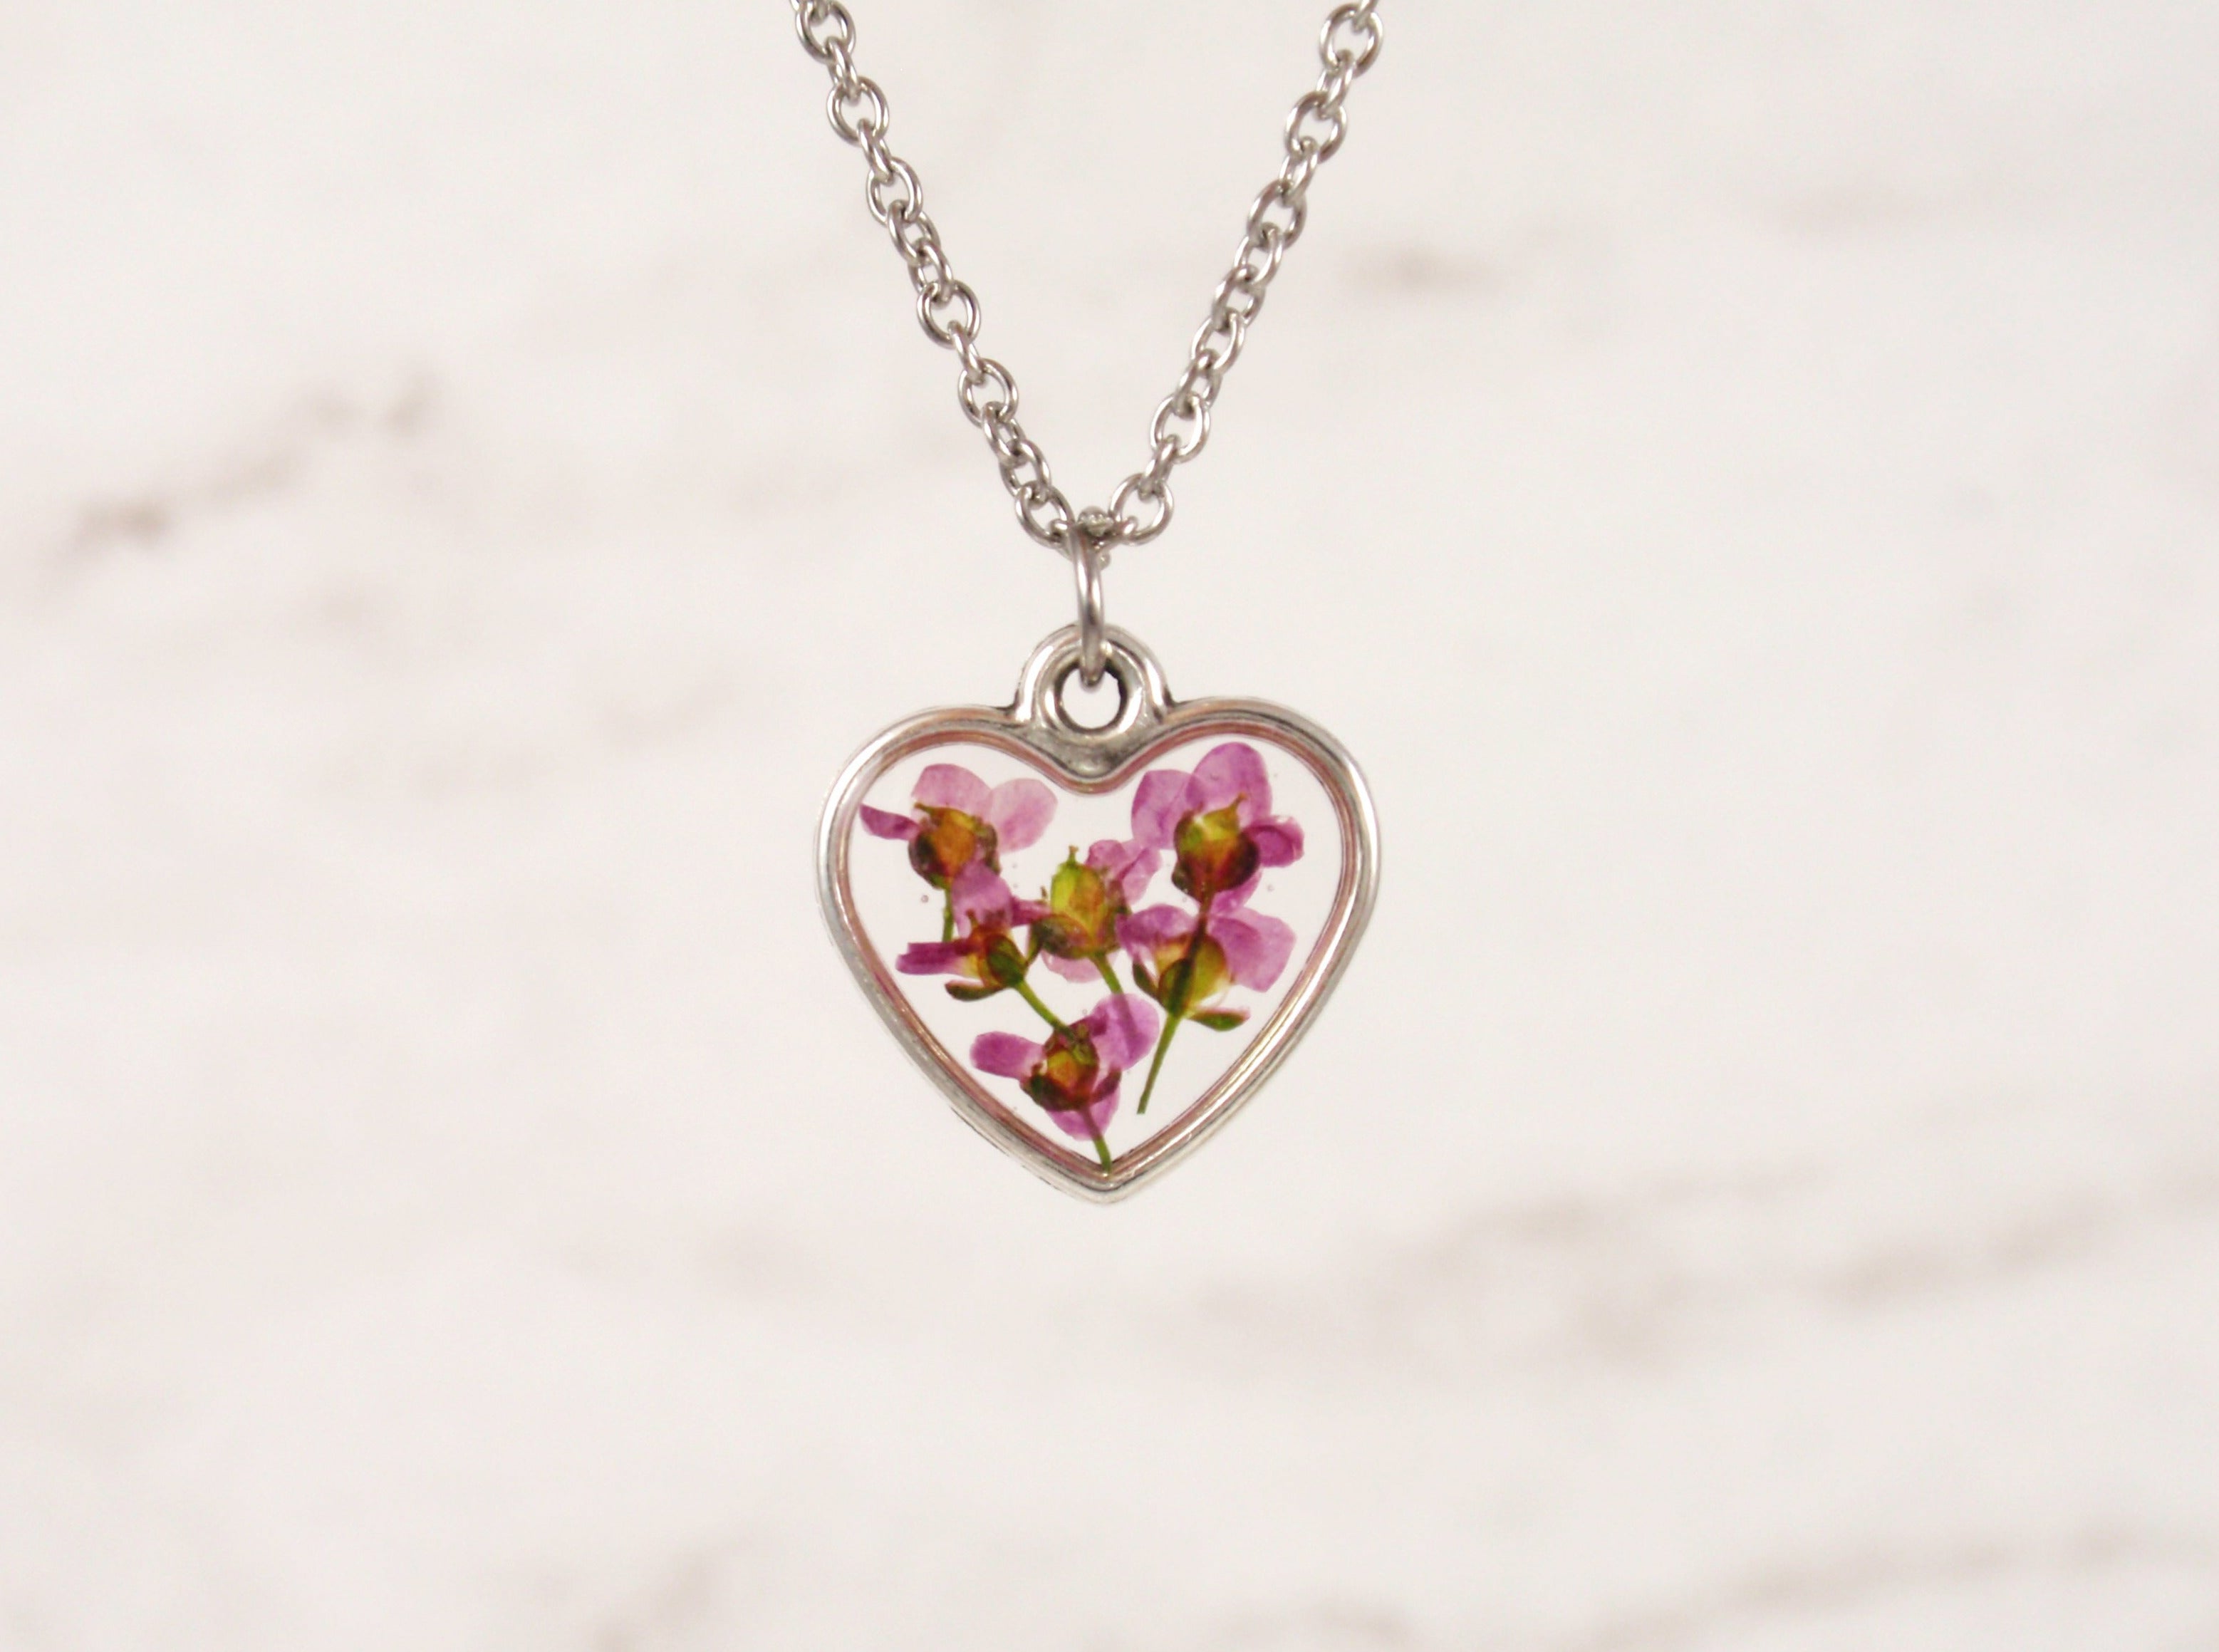 Two-Tone 4 Leaf Clover Heart Flower Pendant Necklace in Yellow/Rose/White  Gold | eBay